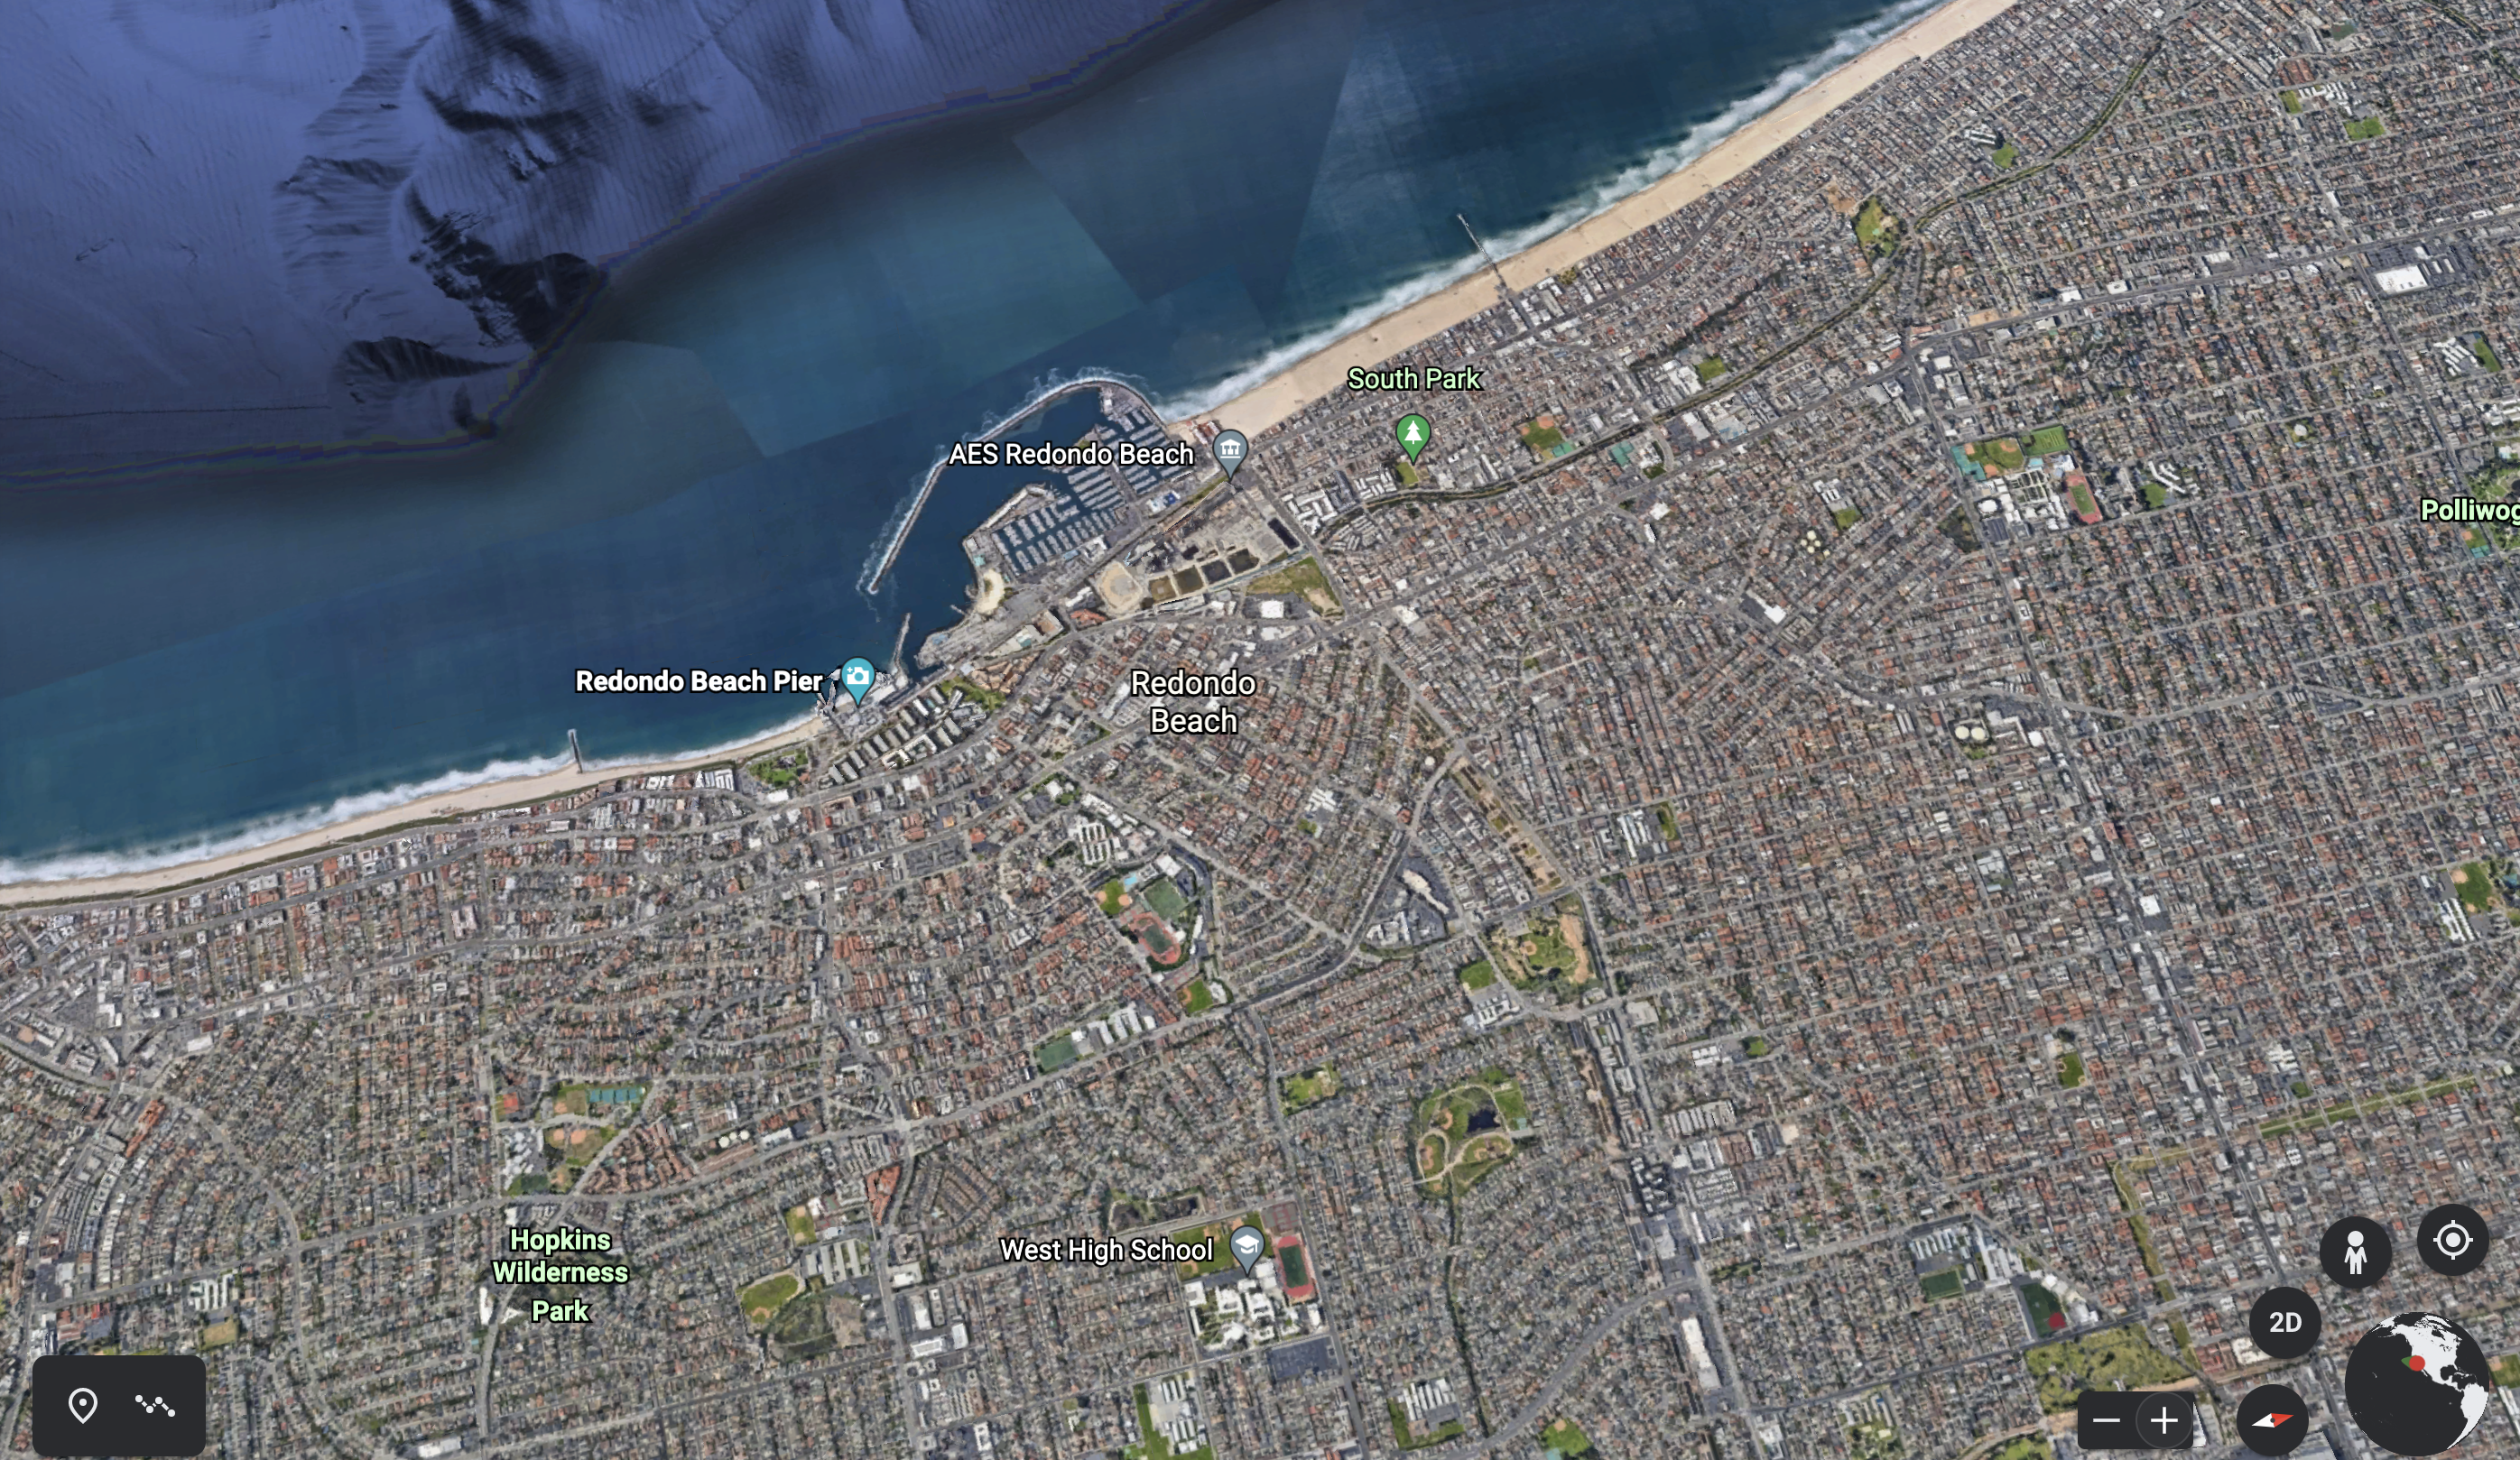 Google Image of Redondo Beach, one of the most dense cities in the West.